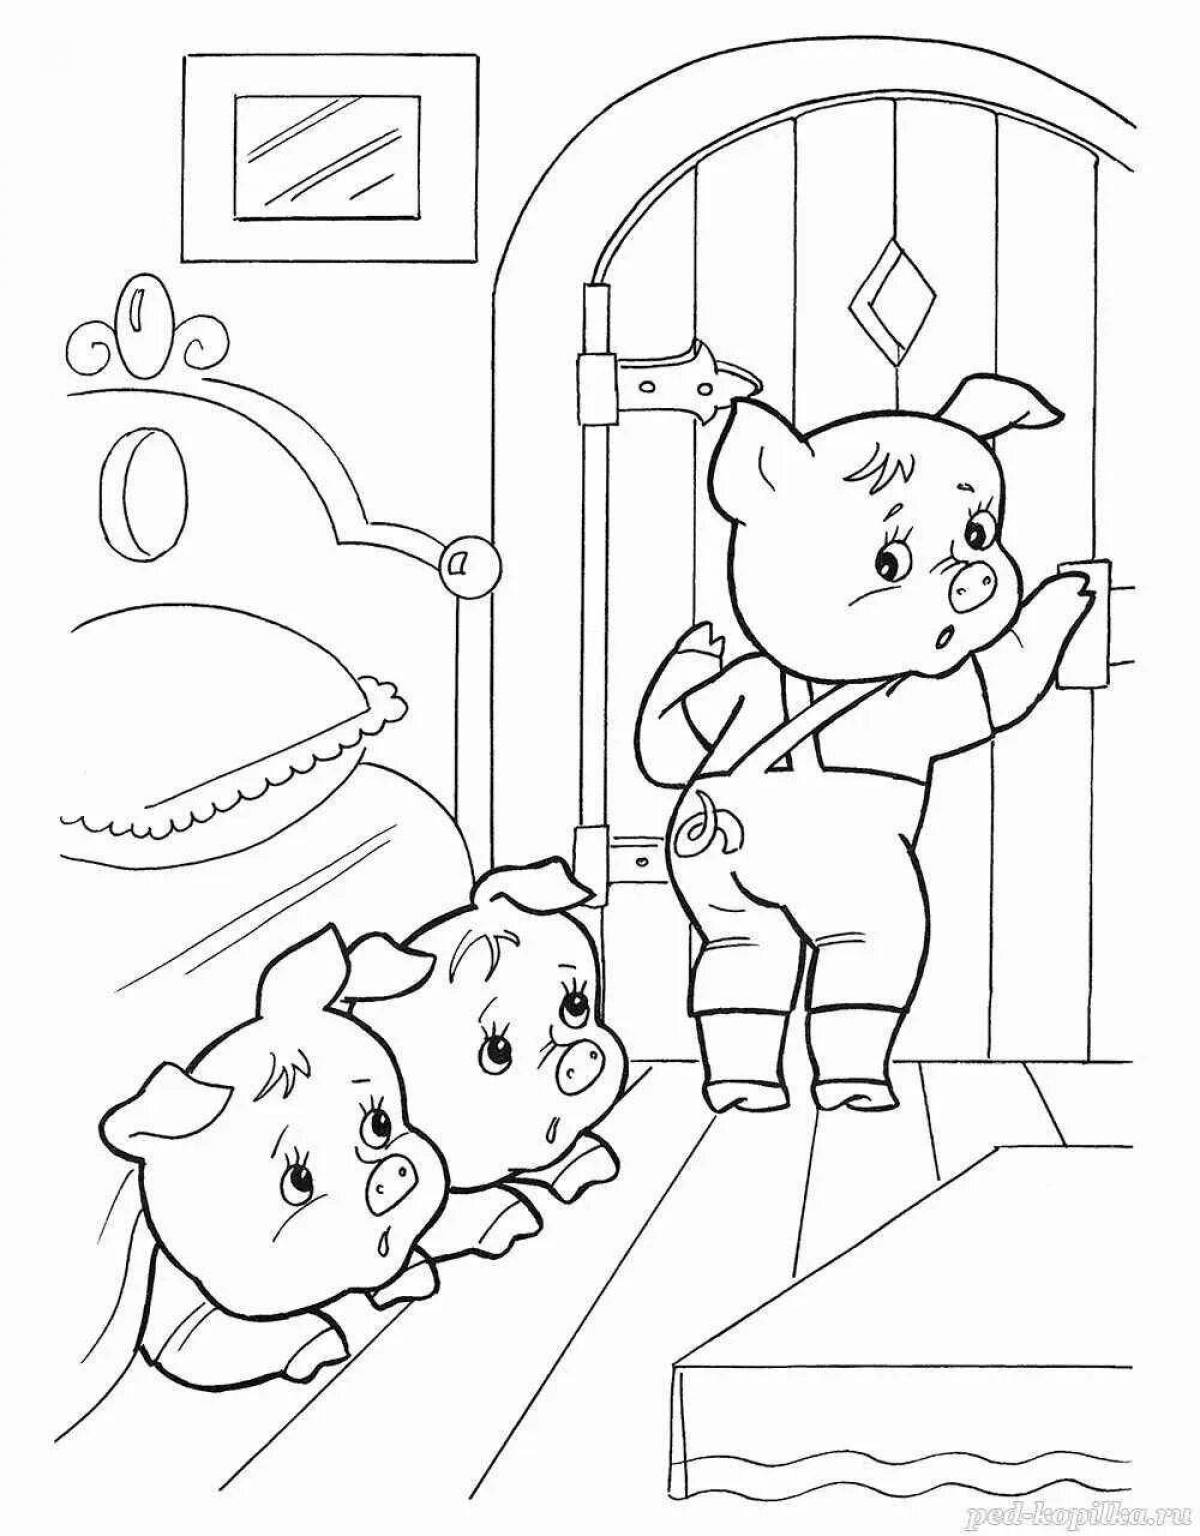 Coloring book funny fairy tale three little pigs